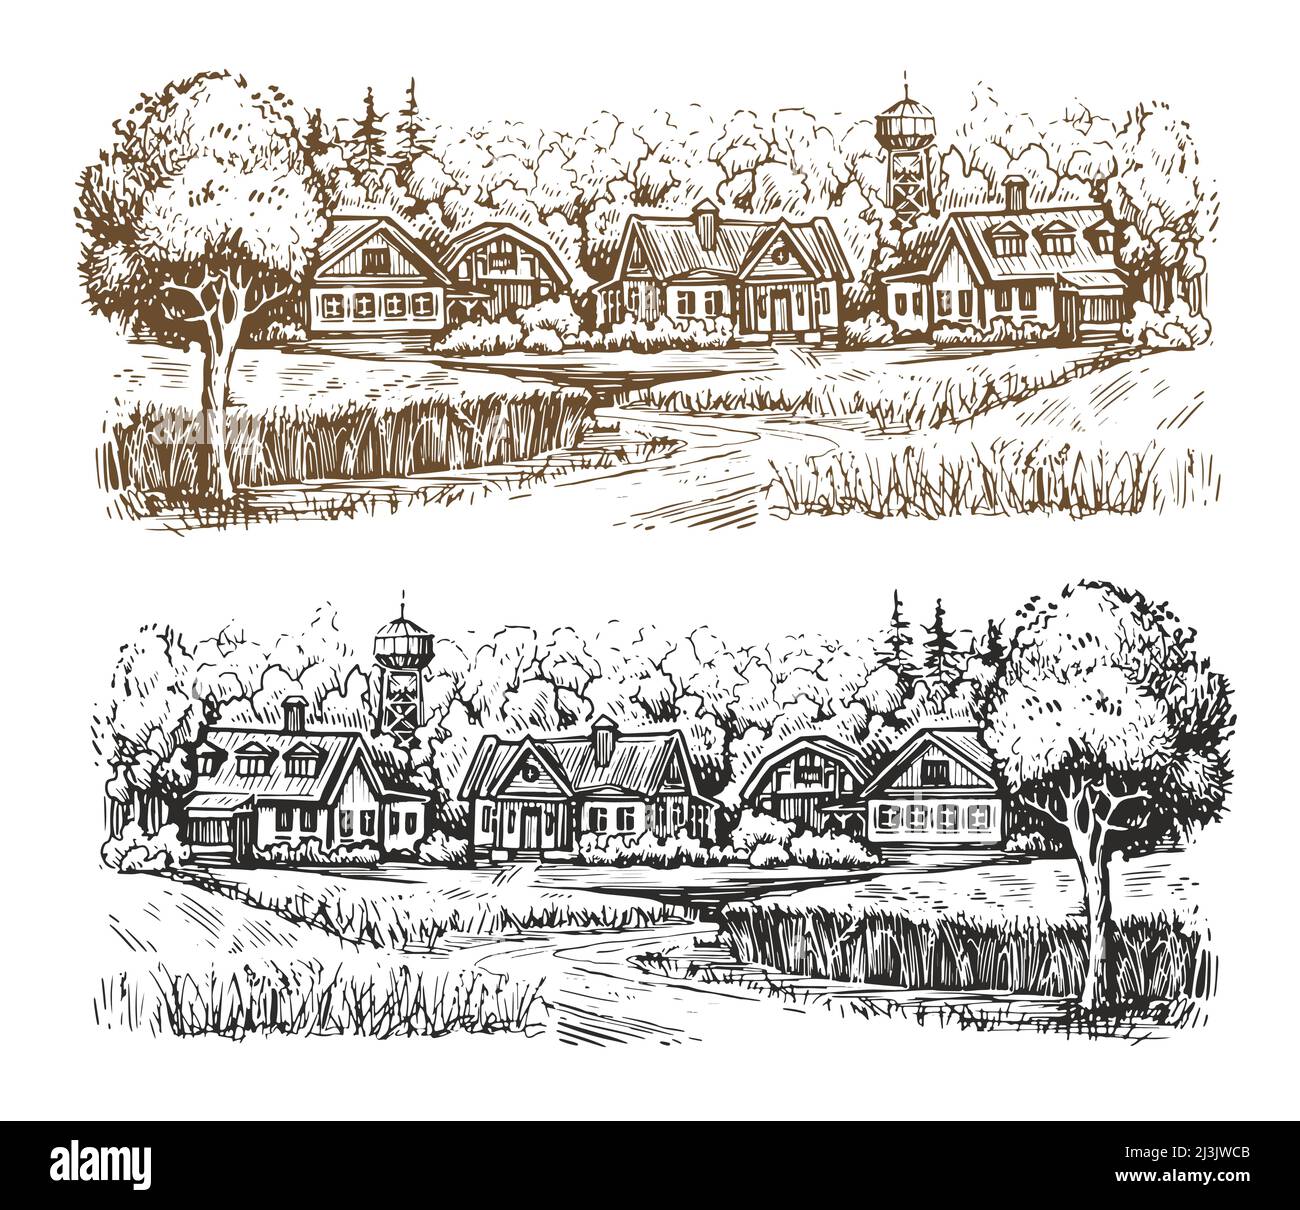 How to draw Village Scenery Easy | Gran aka Scenery Drawing with Color  Pencil - YouTube